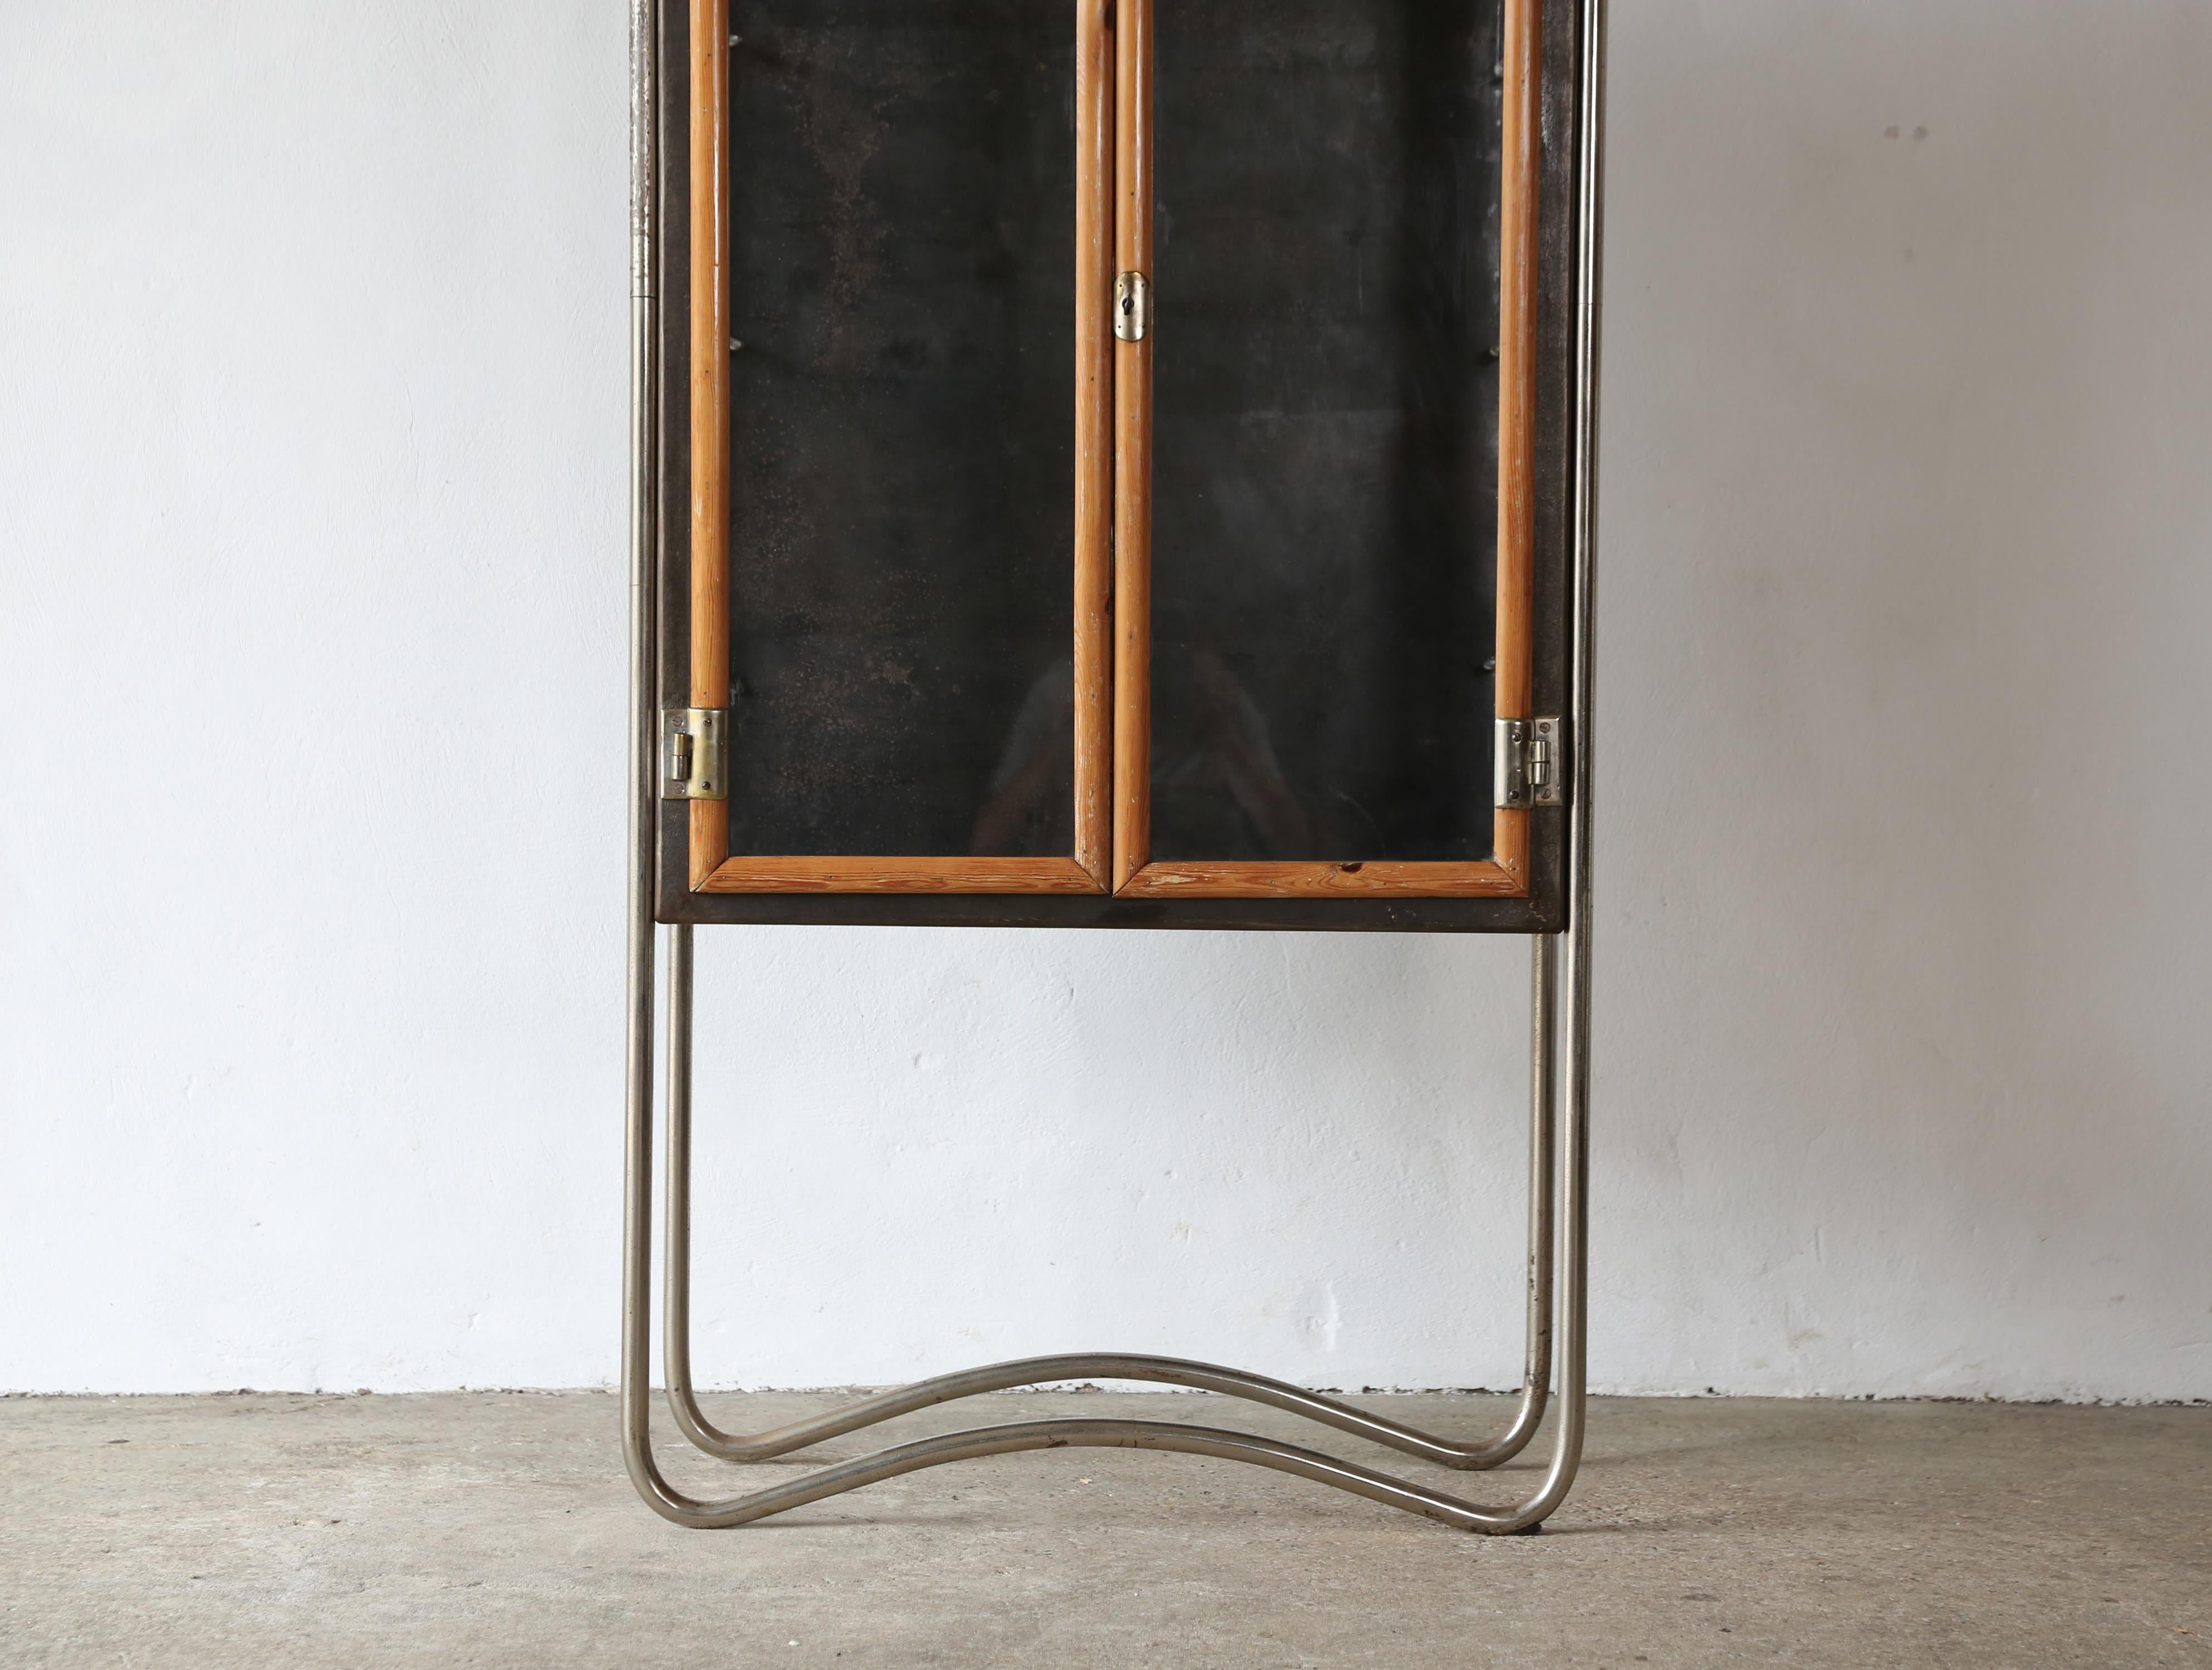 Bauhaus Tubular Steel and Wood Cabinet, 1940s For Sale